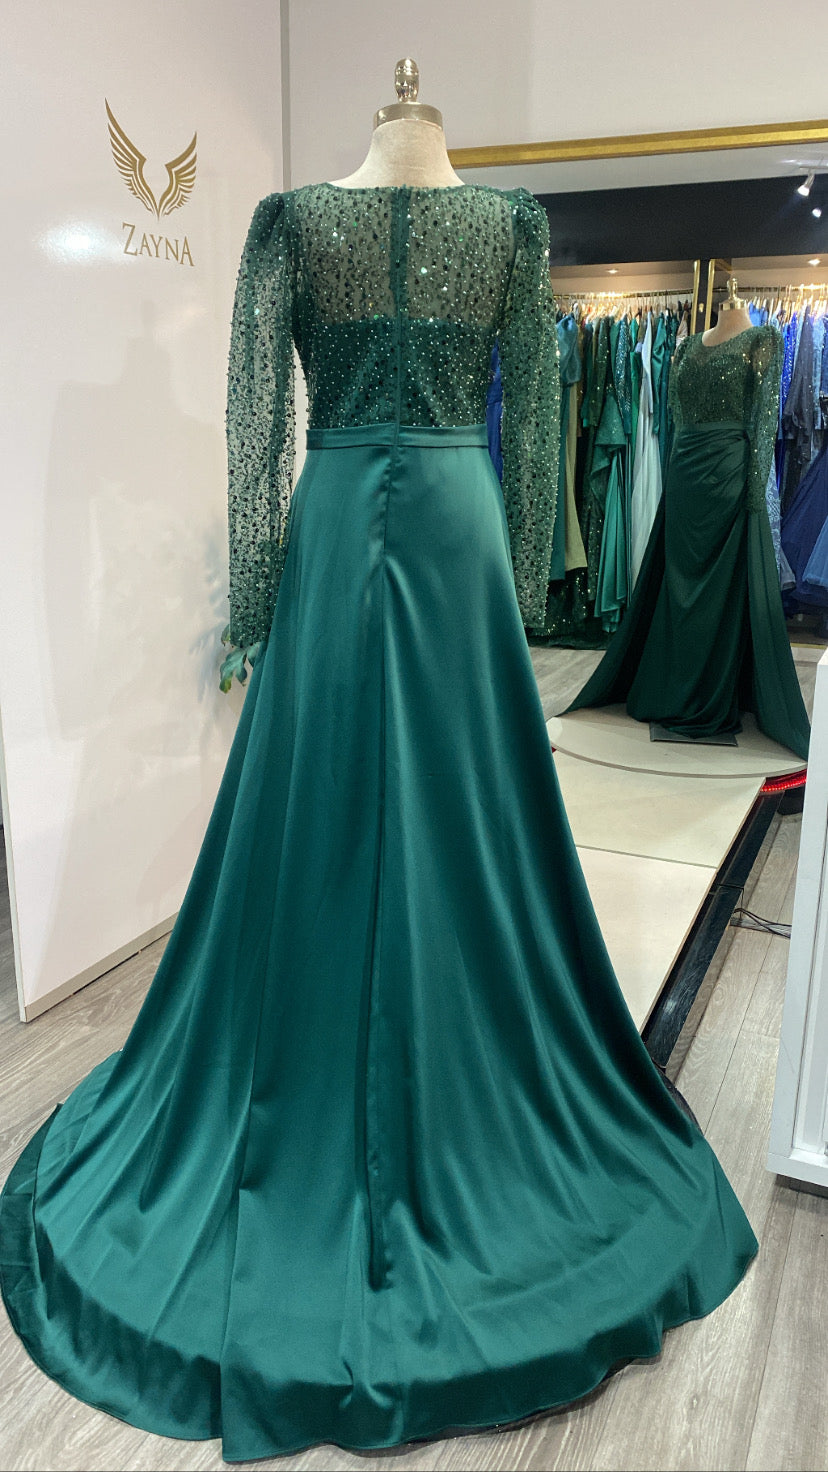 Elegant green dress with trailing beads